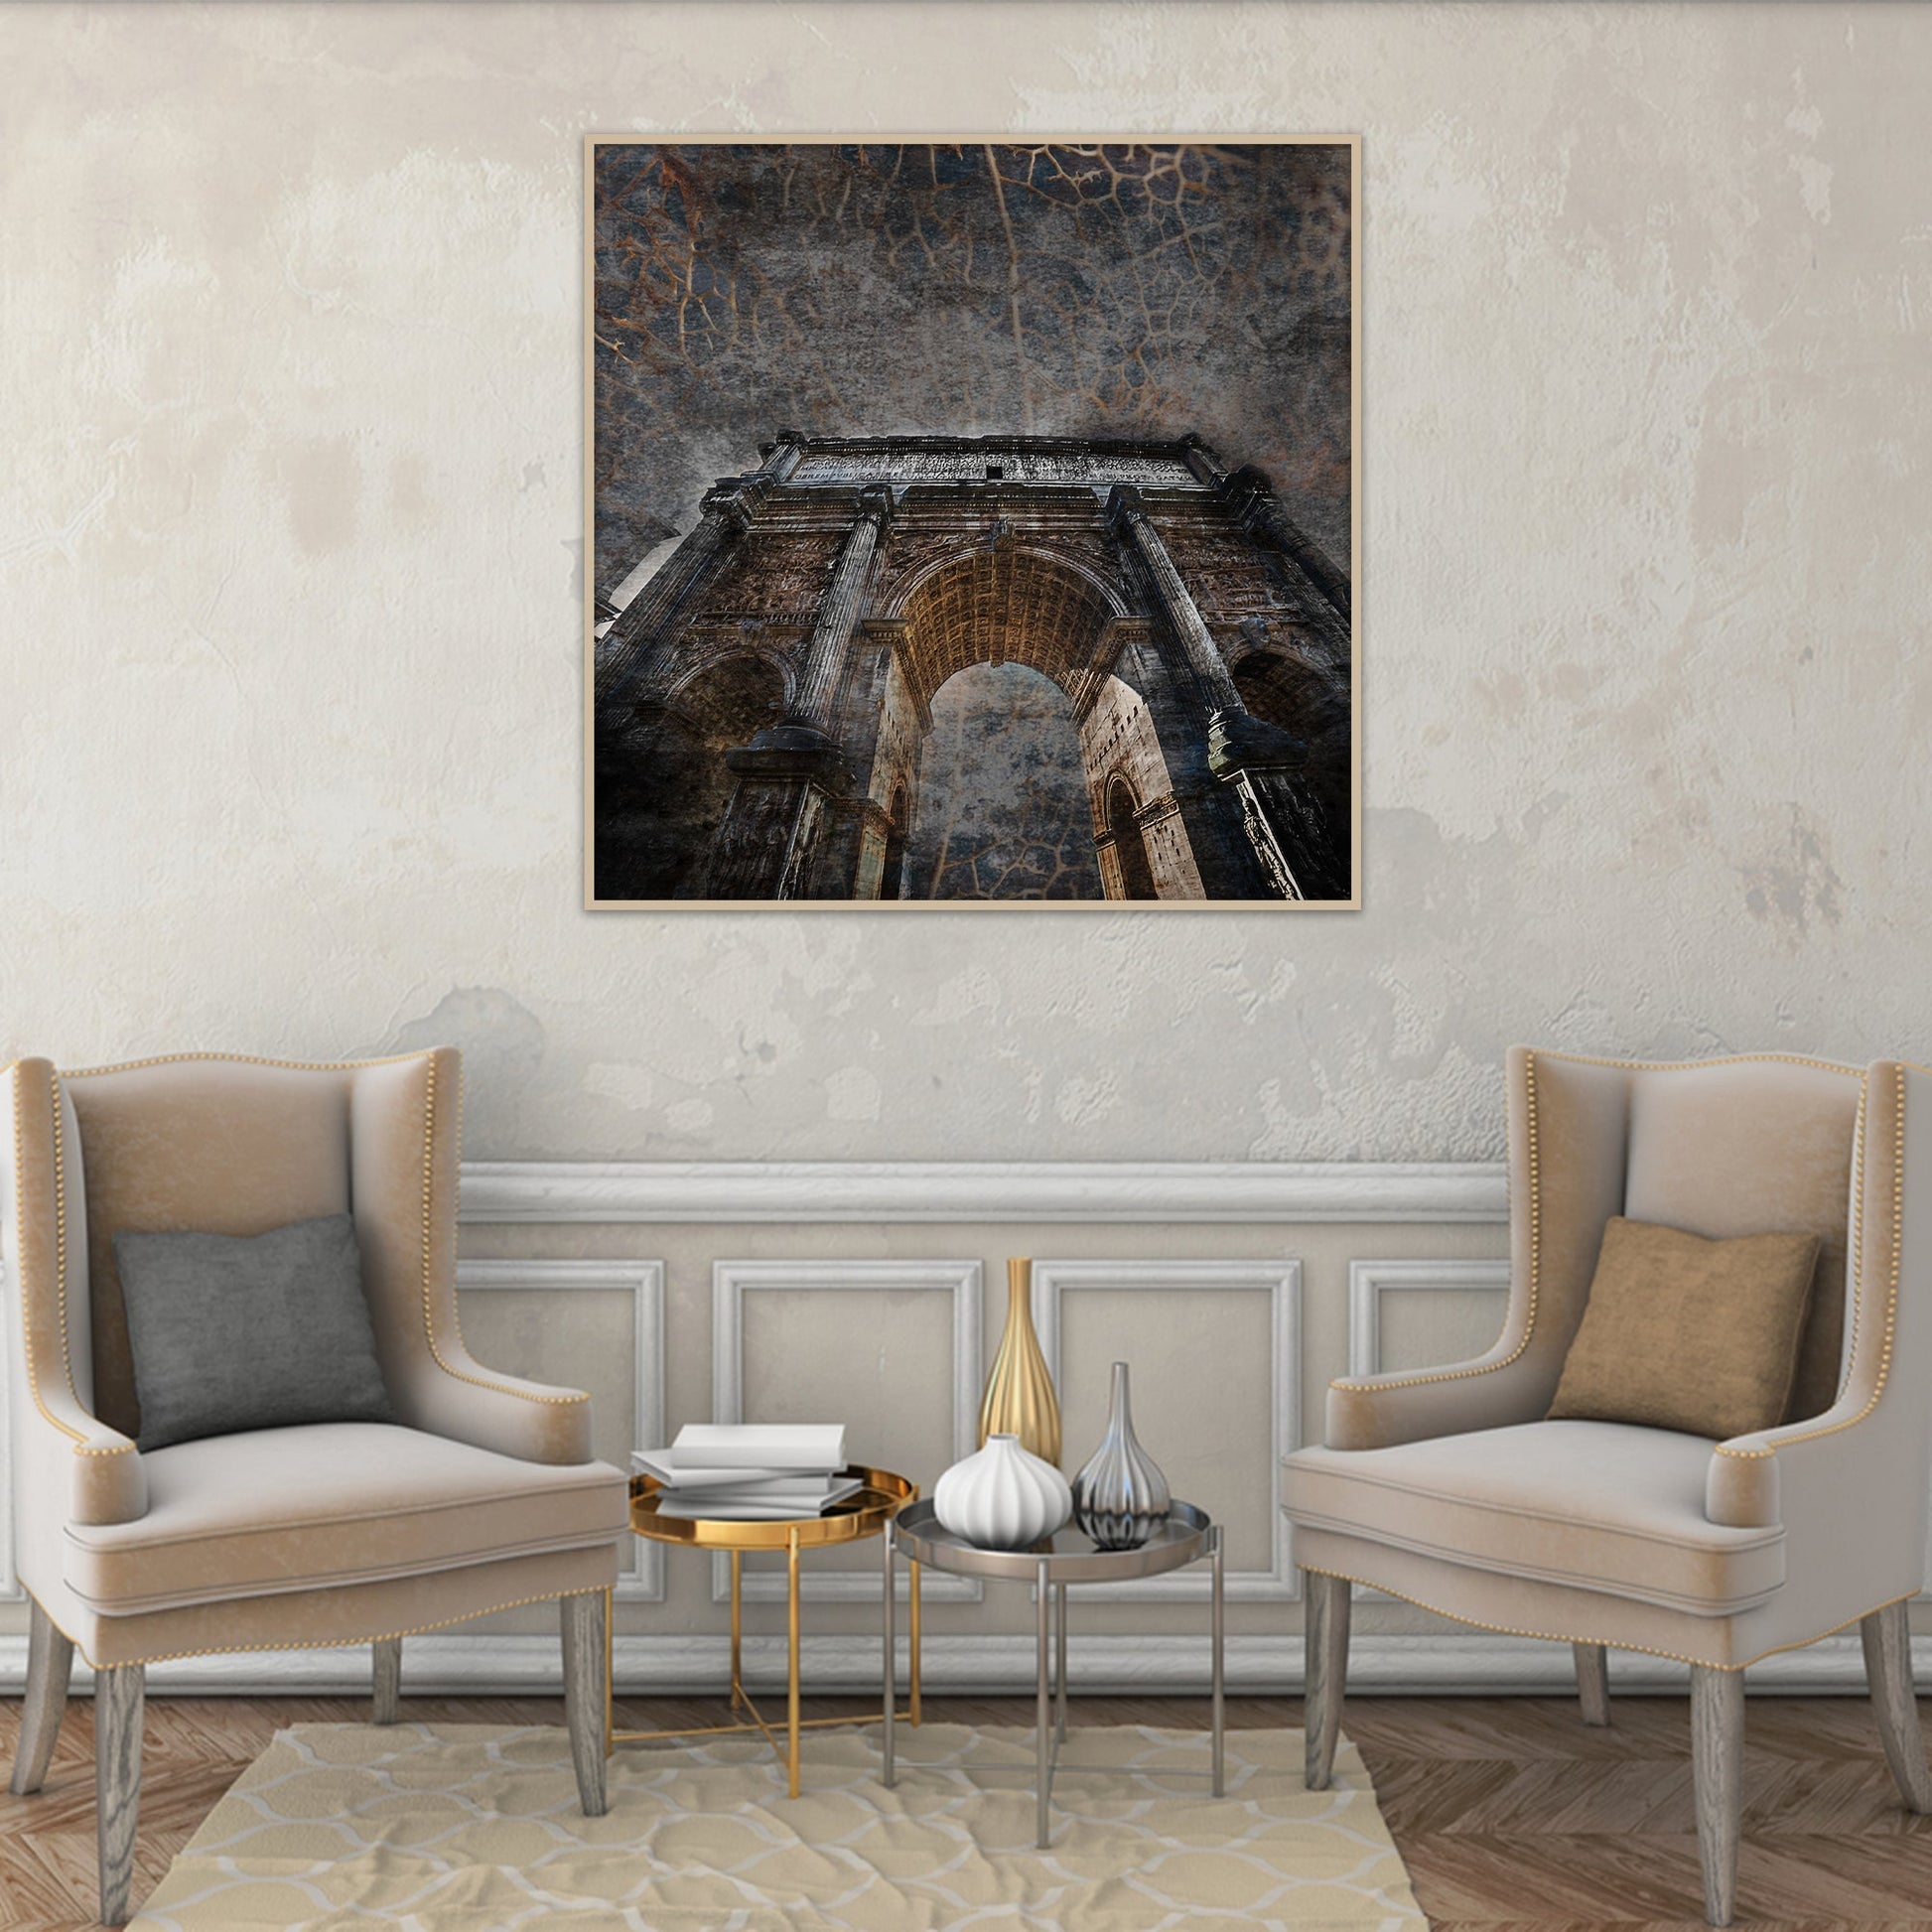 Abstract wall decor print captures the beauty of aging gracefully.